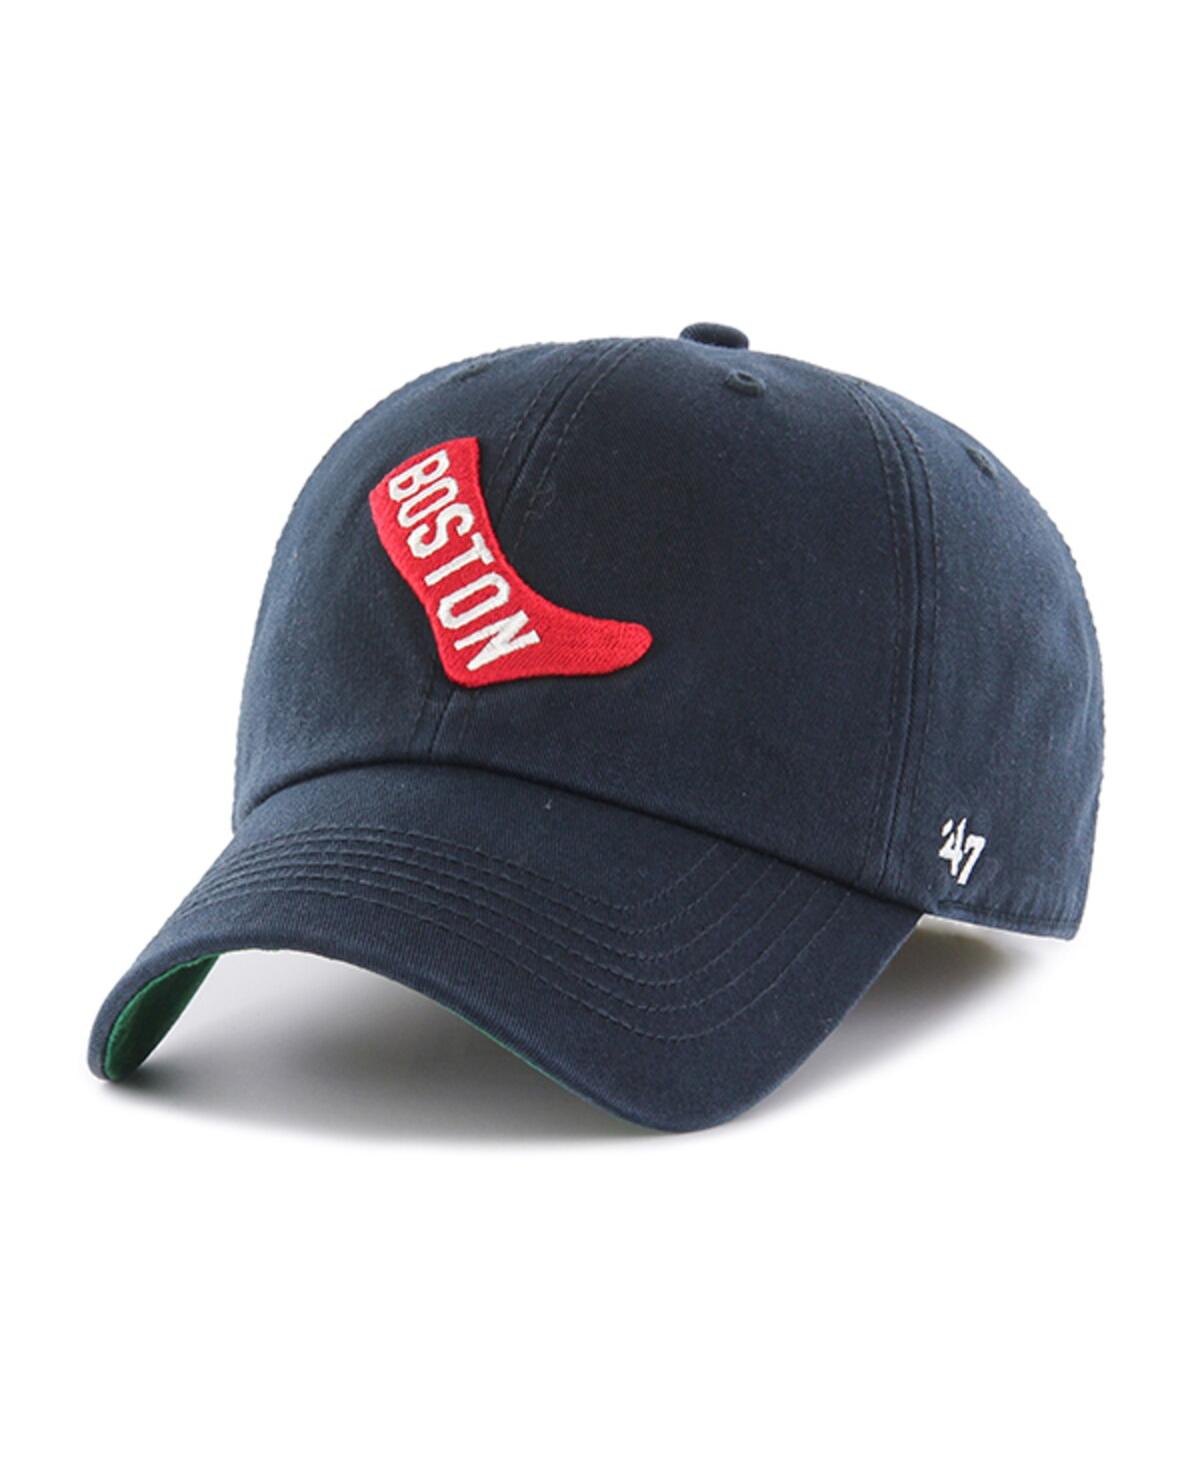 47 BRAND MEN'S '47 BRAND NAVY BOSTON RED SOX COOPERSTOWN COLLECTION FRANCHISE LOGO FITTED HAT